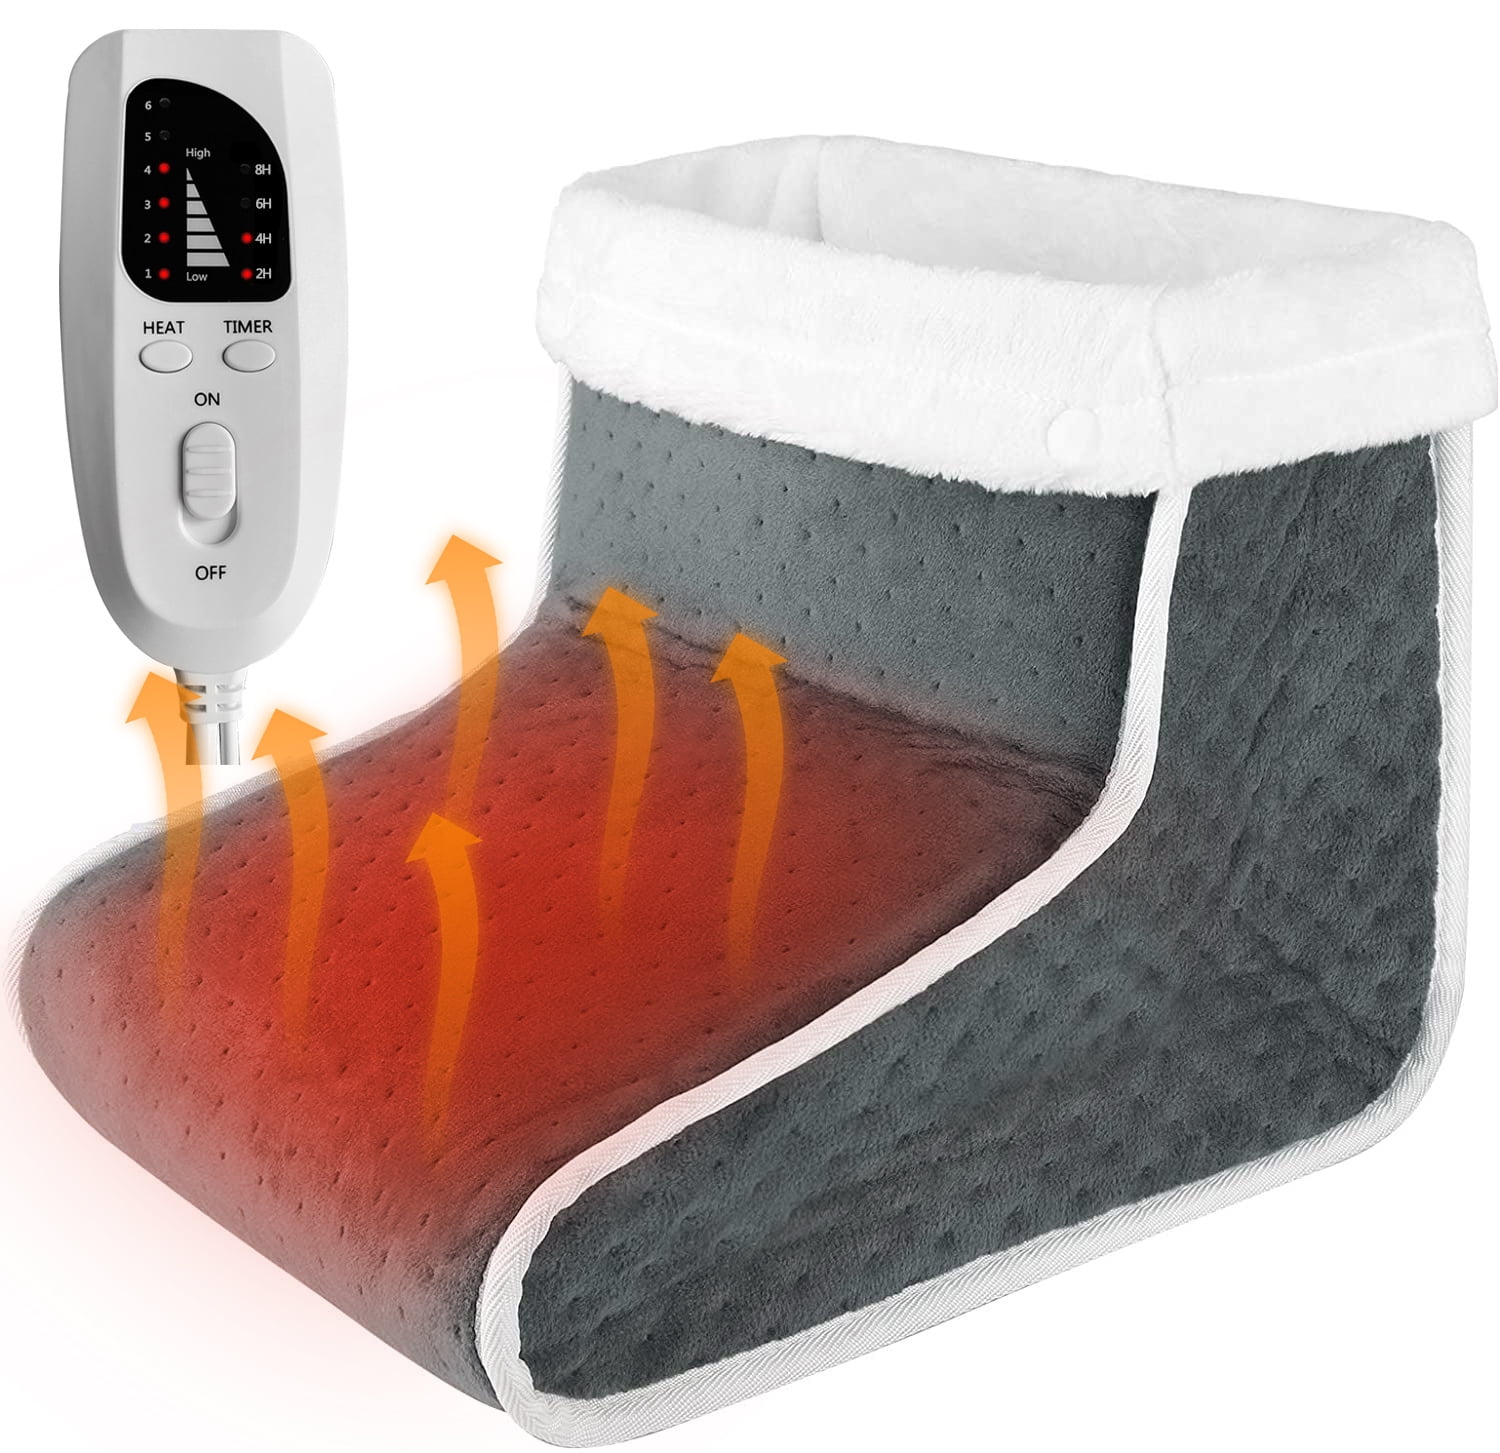 Adjustable Detachable Electric Foot Warmer Heater Feet Heating Boot Shoes Pads 